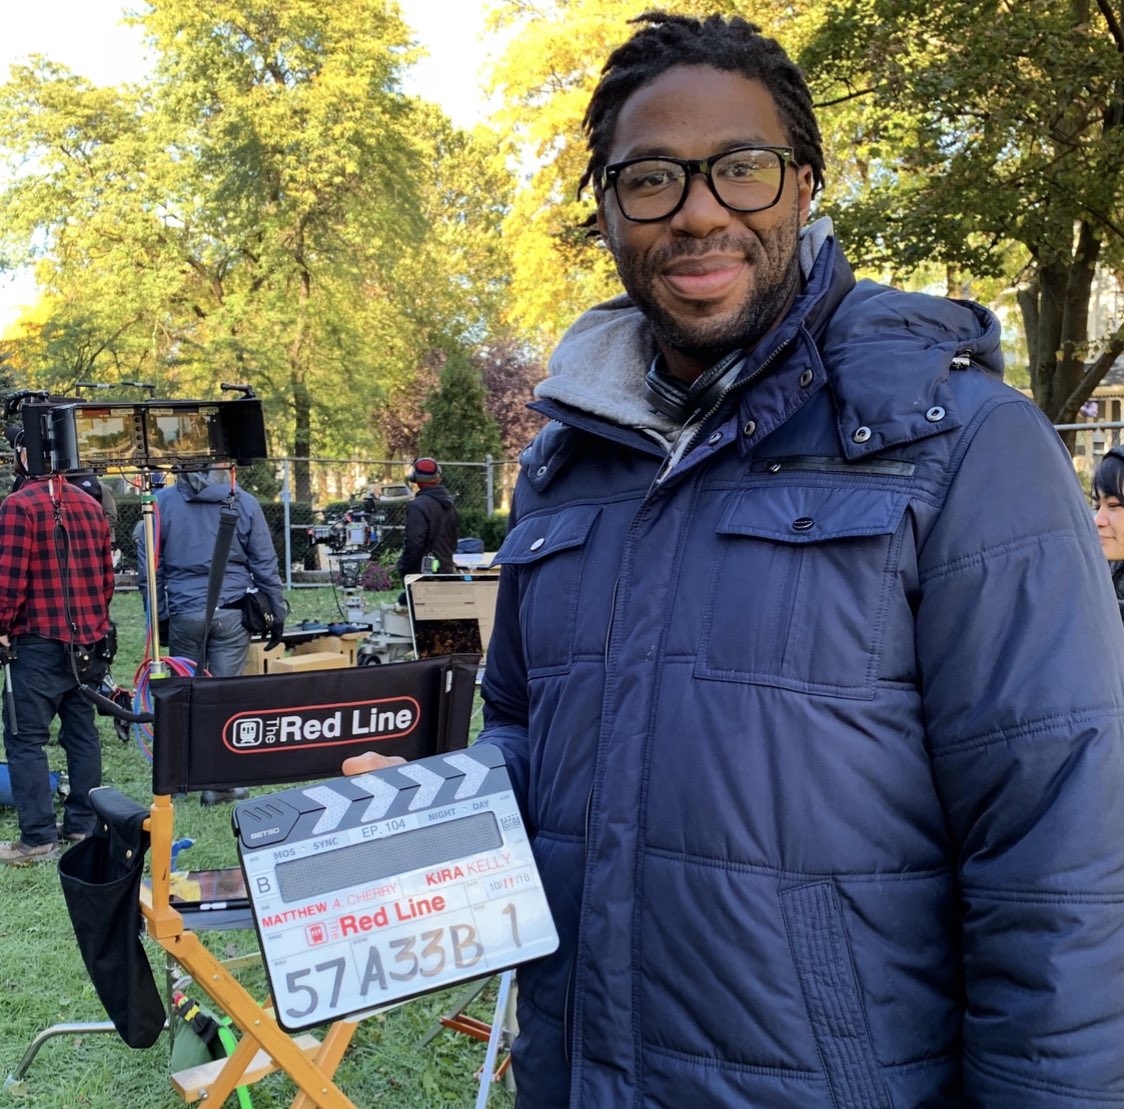 The episode of the new CBS event series #TheRedLine I directed airs this Sunday. It’s the second of two episodes airing that night and the first directed by @aurog24 precedes it at 8/7c. Check it out and support! @TheRedLineCBS